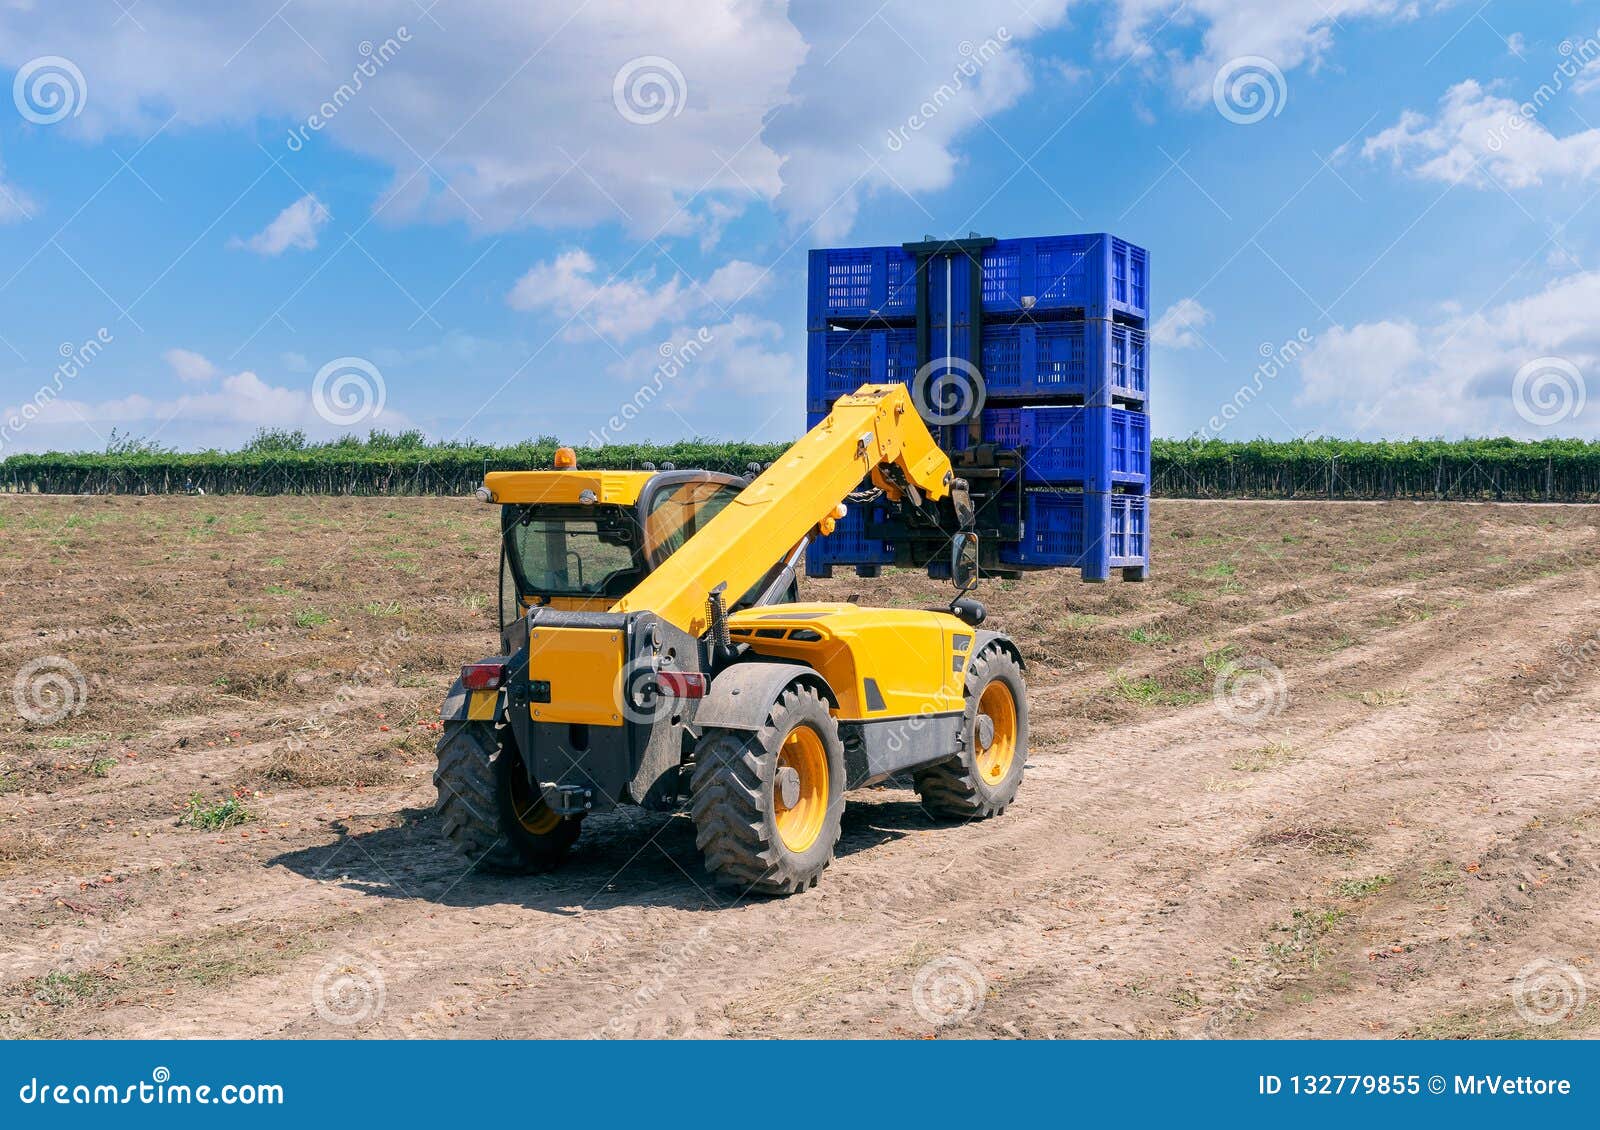 forklift loader loads plastic containers outdoor.